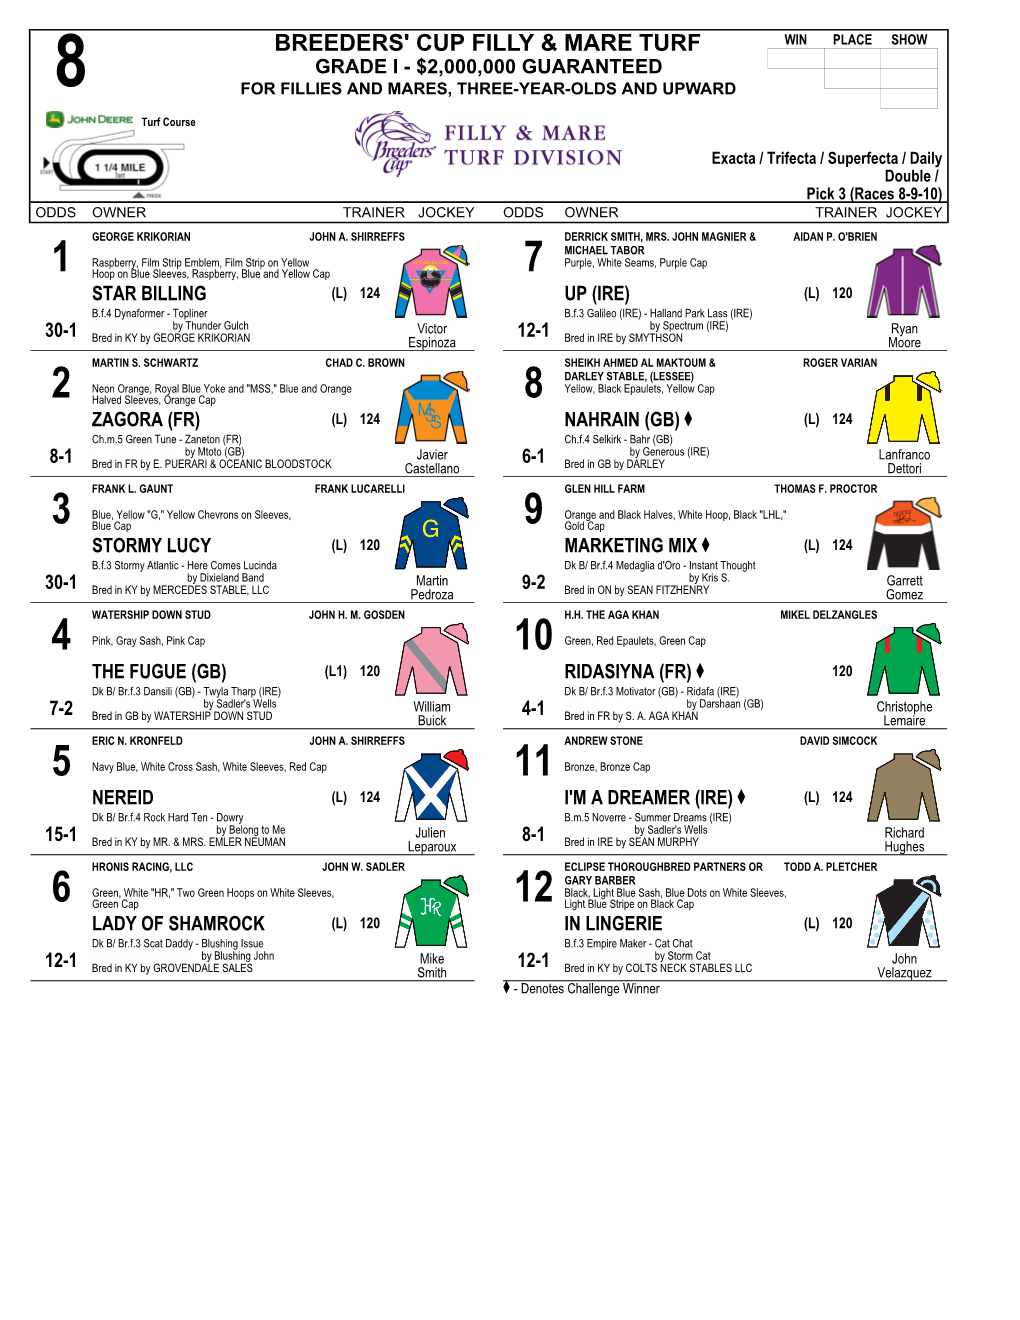 Breeders' Cup Filly & Mare Turf